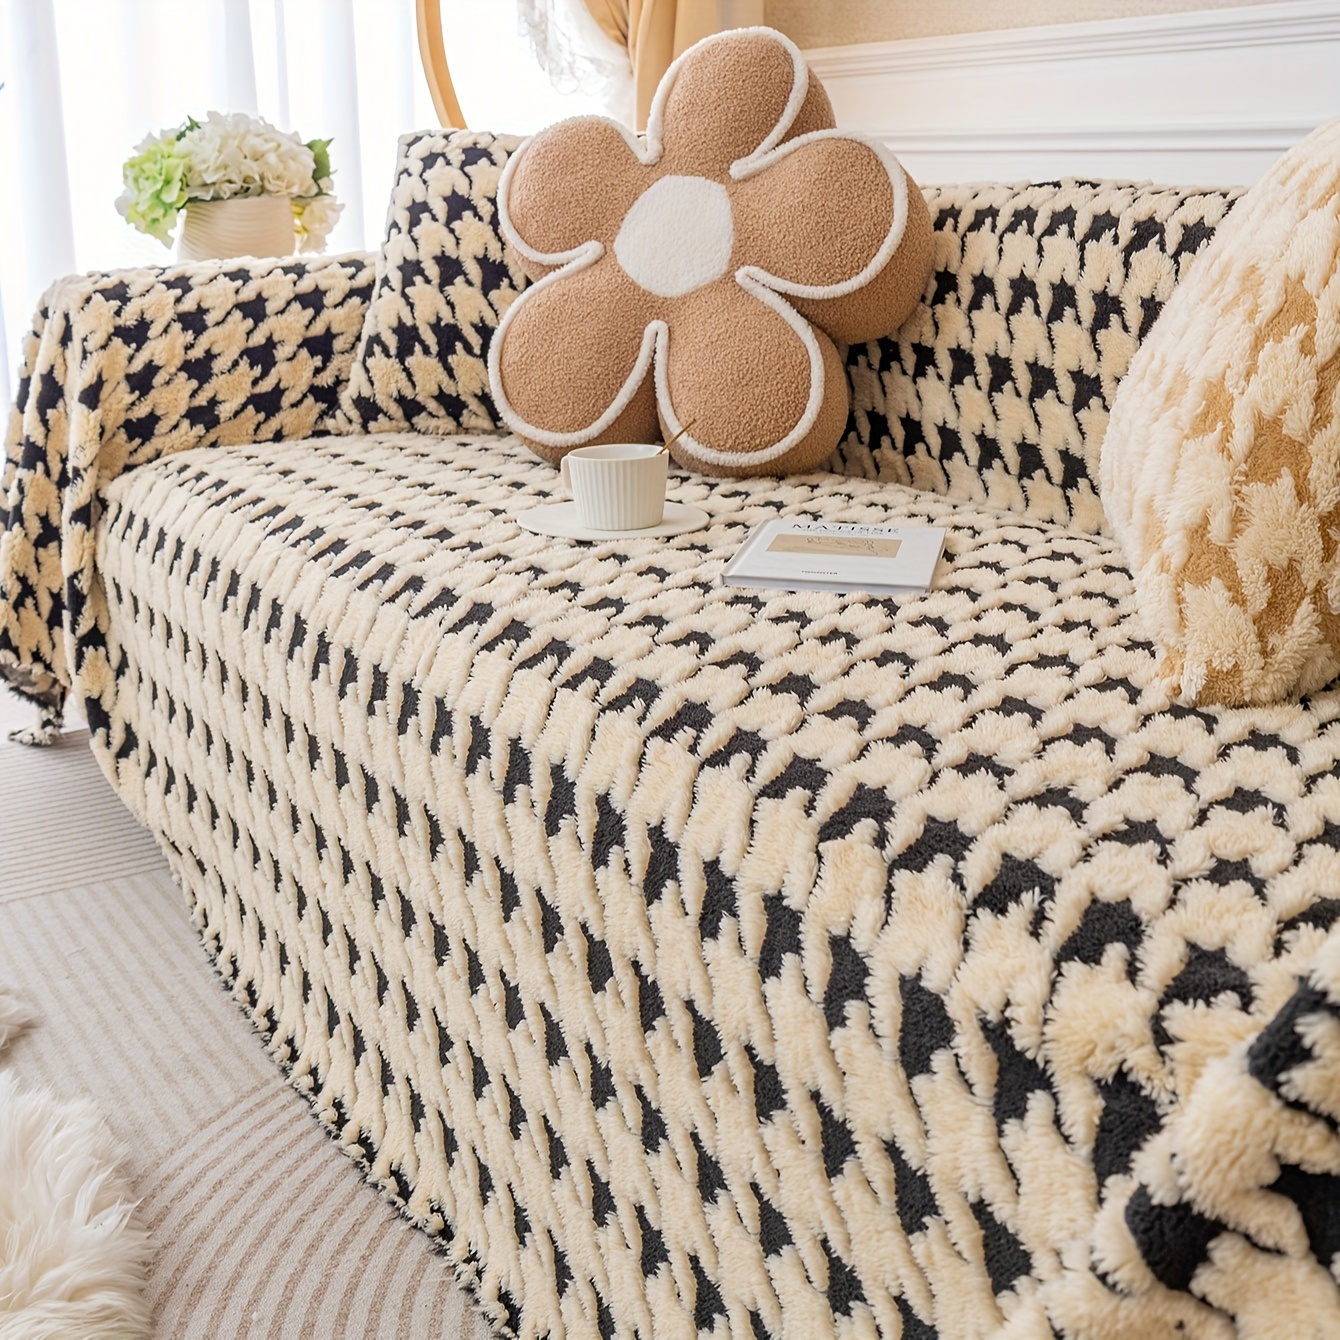 Houndstooth Plush Mat Furniture Protection Anti-Slip Couch Cover